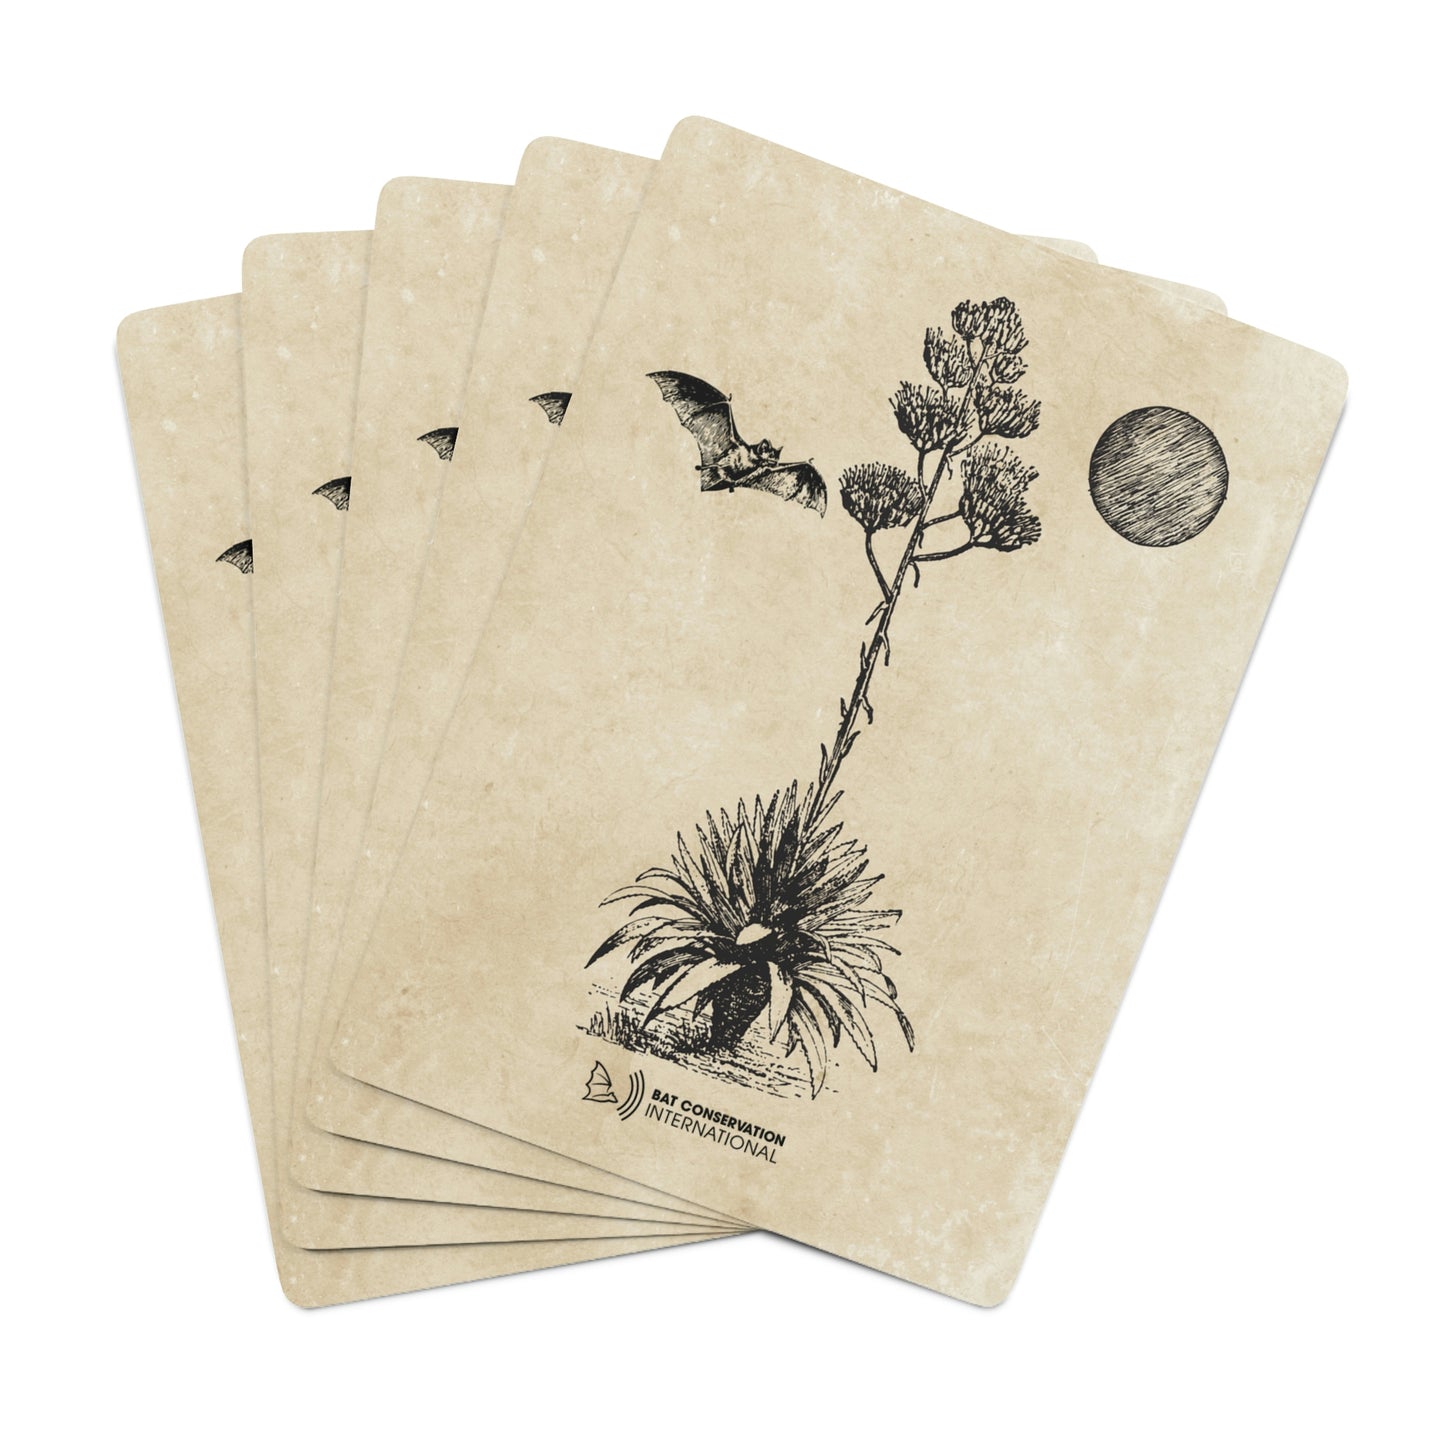 Bats & Agave Sketch - Playing Cards